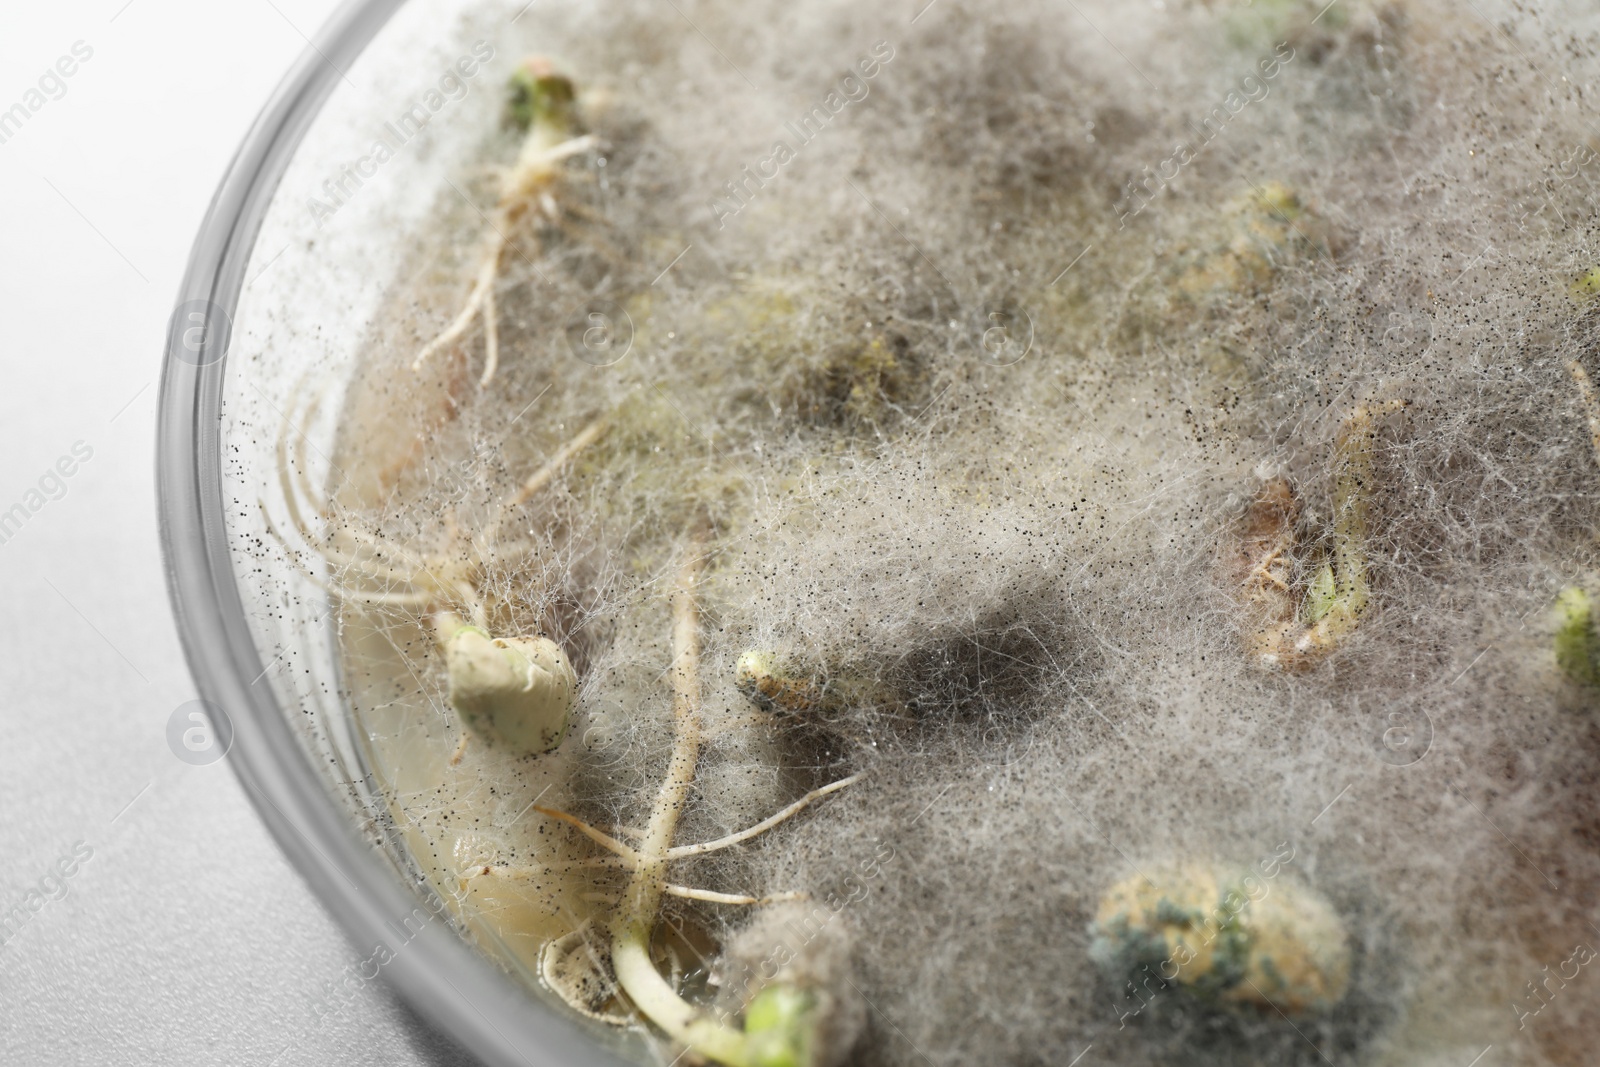 Photo of Germination and energy analysis of soybeans in Petri dish on table, closeup. Laboratory research